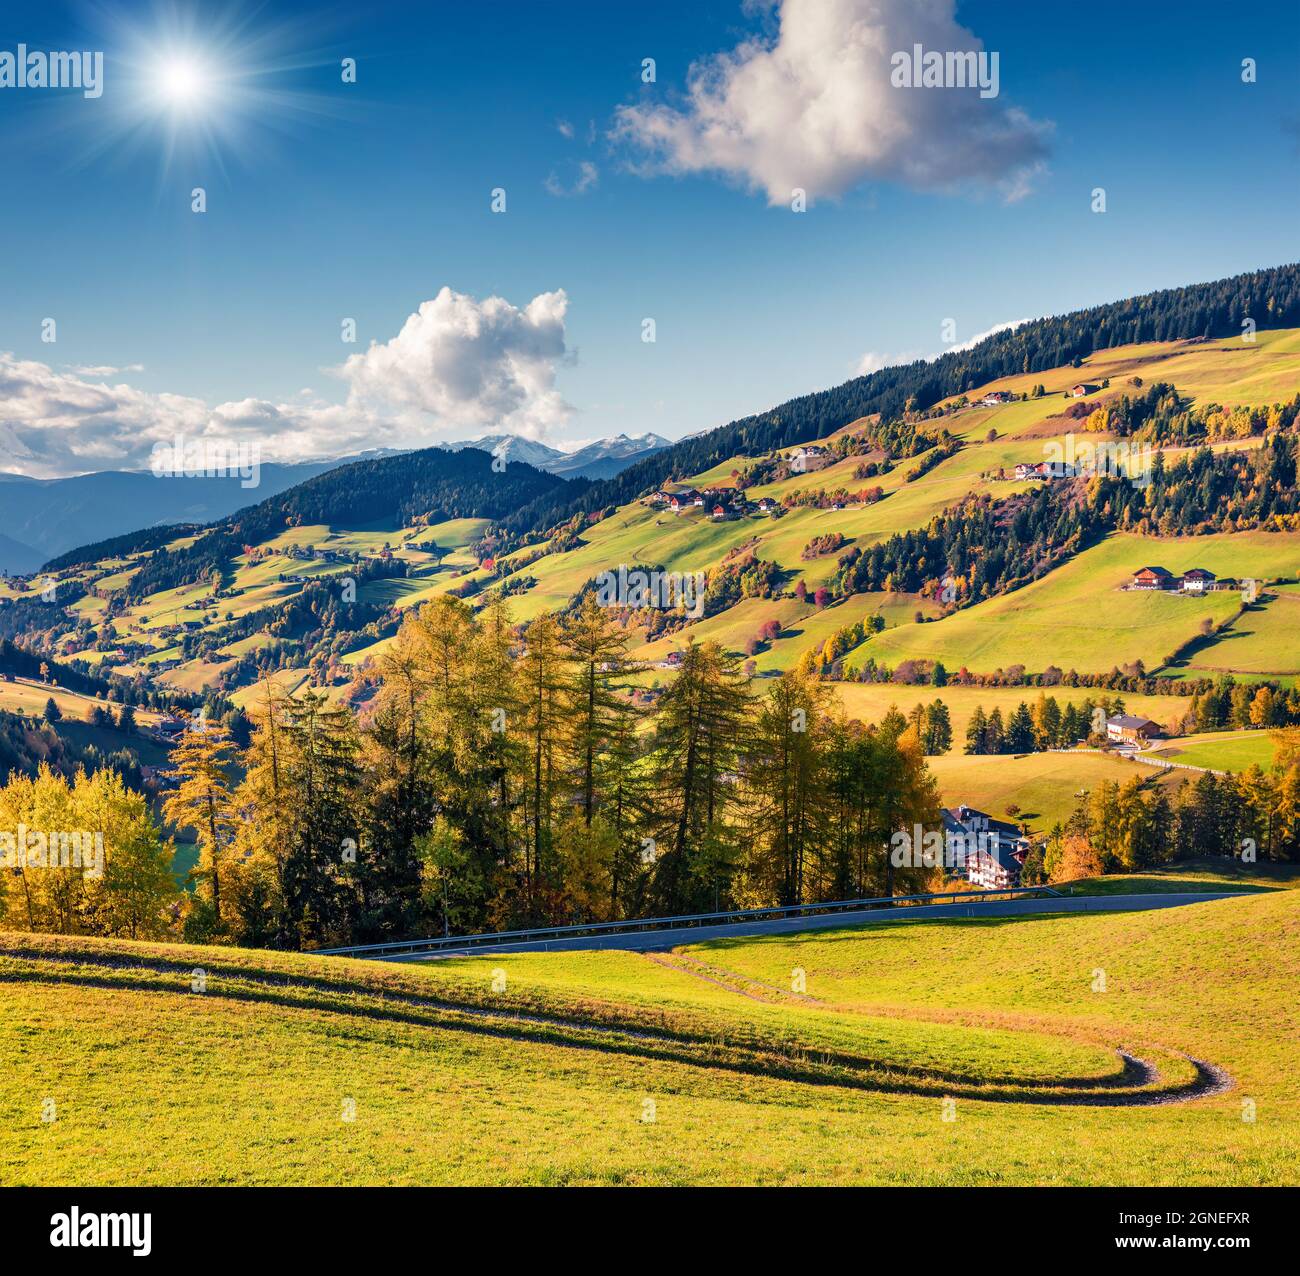 Great autumn view of Santa Maddalena village. Colorful morning landscape of Dolomite Alps, Italy, Europe. Beauty of countryside concept background. Stock Photo